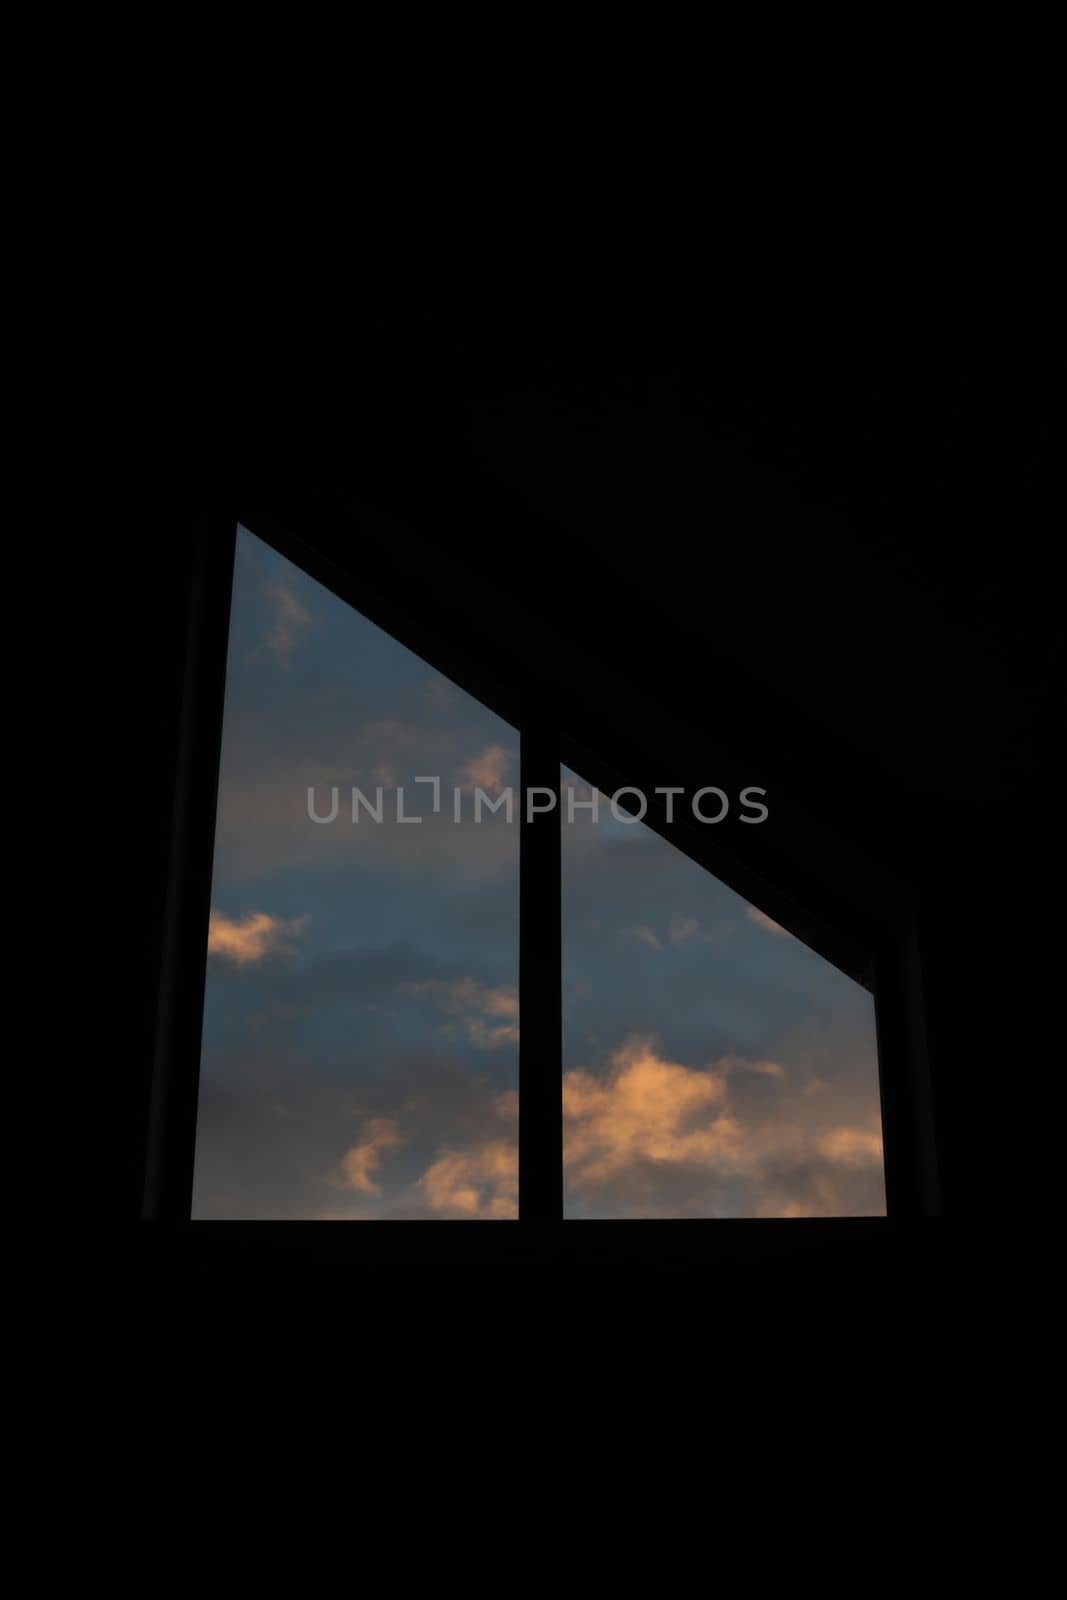 The view from the window of the dramatic sunset sky with clouds. by paralisart